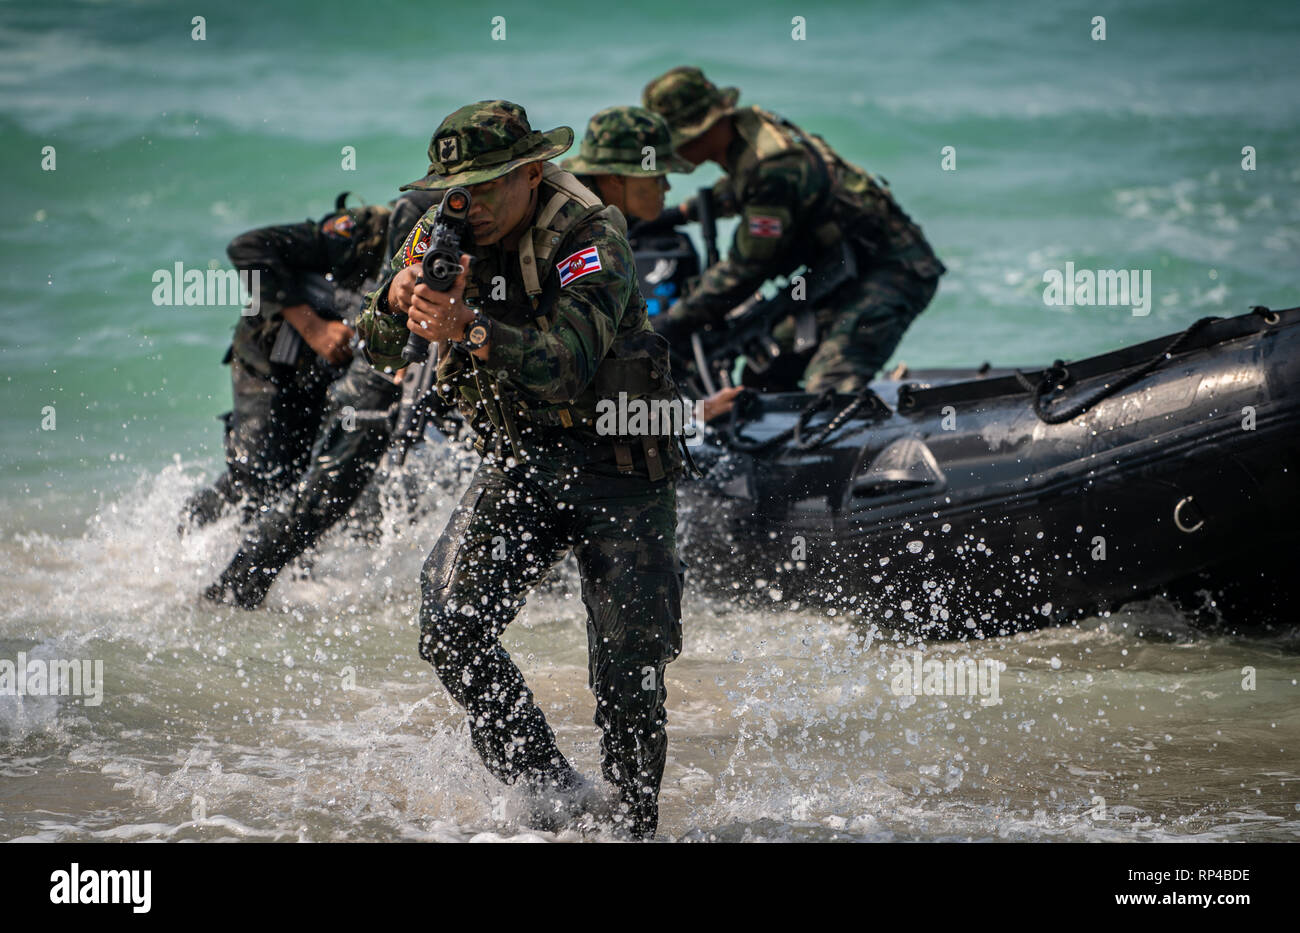 Royal Thai reconnaissance Marines storm a beach in an amphibious assault exercise during Cobra Gold 19 at Hat Yao Beach February 16, 2019 in Sattahip, Thailand. Cobra Gold is the largest annual joint military cooperation exercise in the Indo-Pacific region. Stock Photo